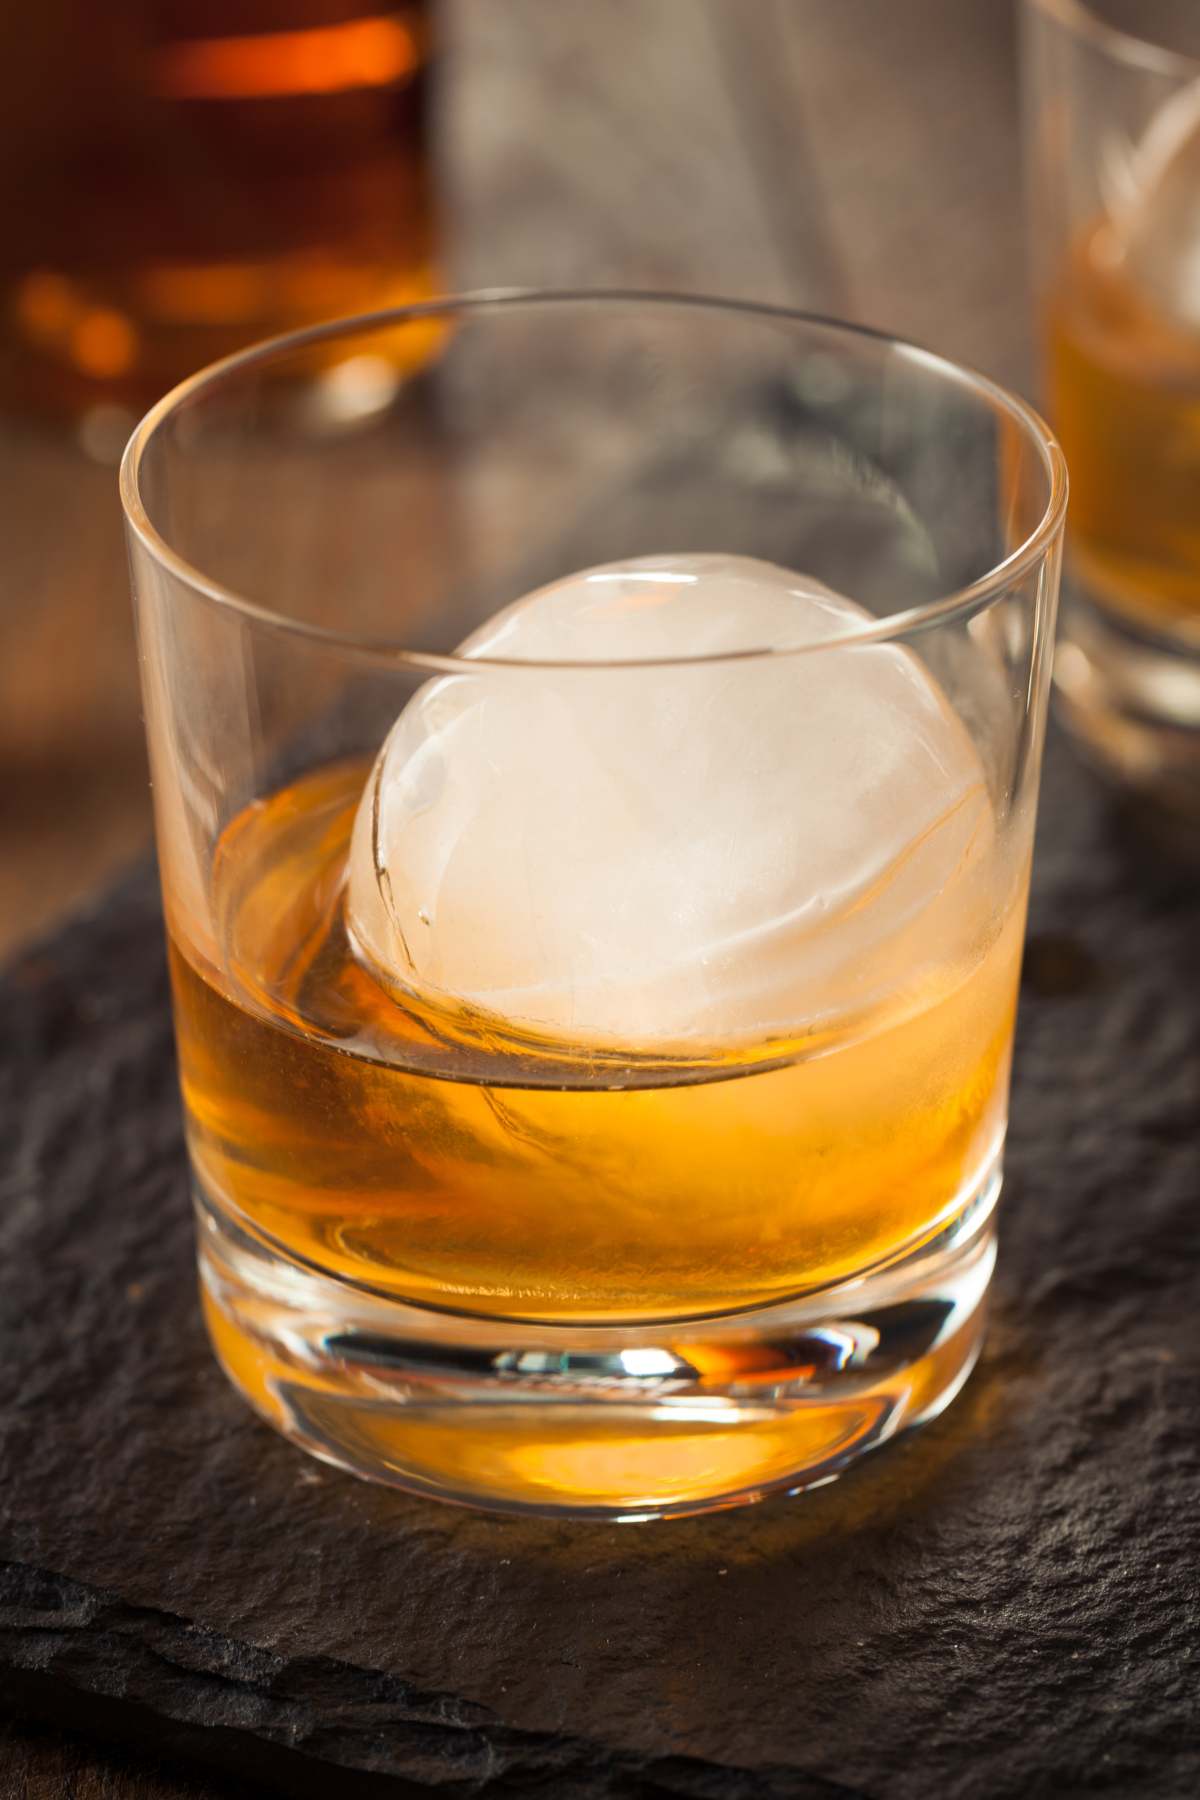 Is bourbon keto? How many carbs are in bourbon? If you're on a low-carb or keto diet, you may be wondering whether or not you can enjoy a glass of bourbon without sabotaging your diet goals. In this guide, we will take a closer look at bourbon and its carb content to help you make proper choices.